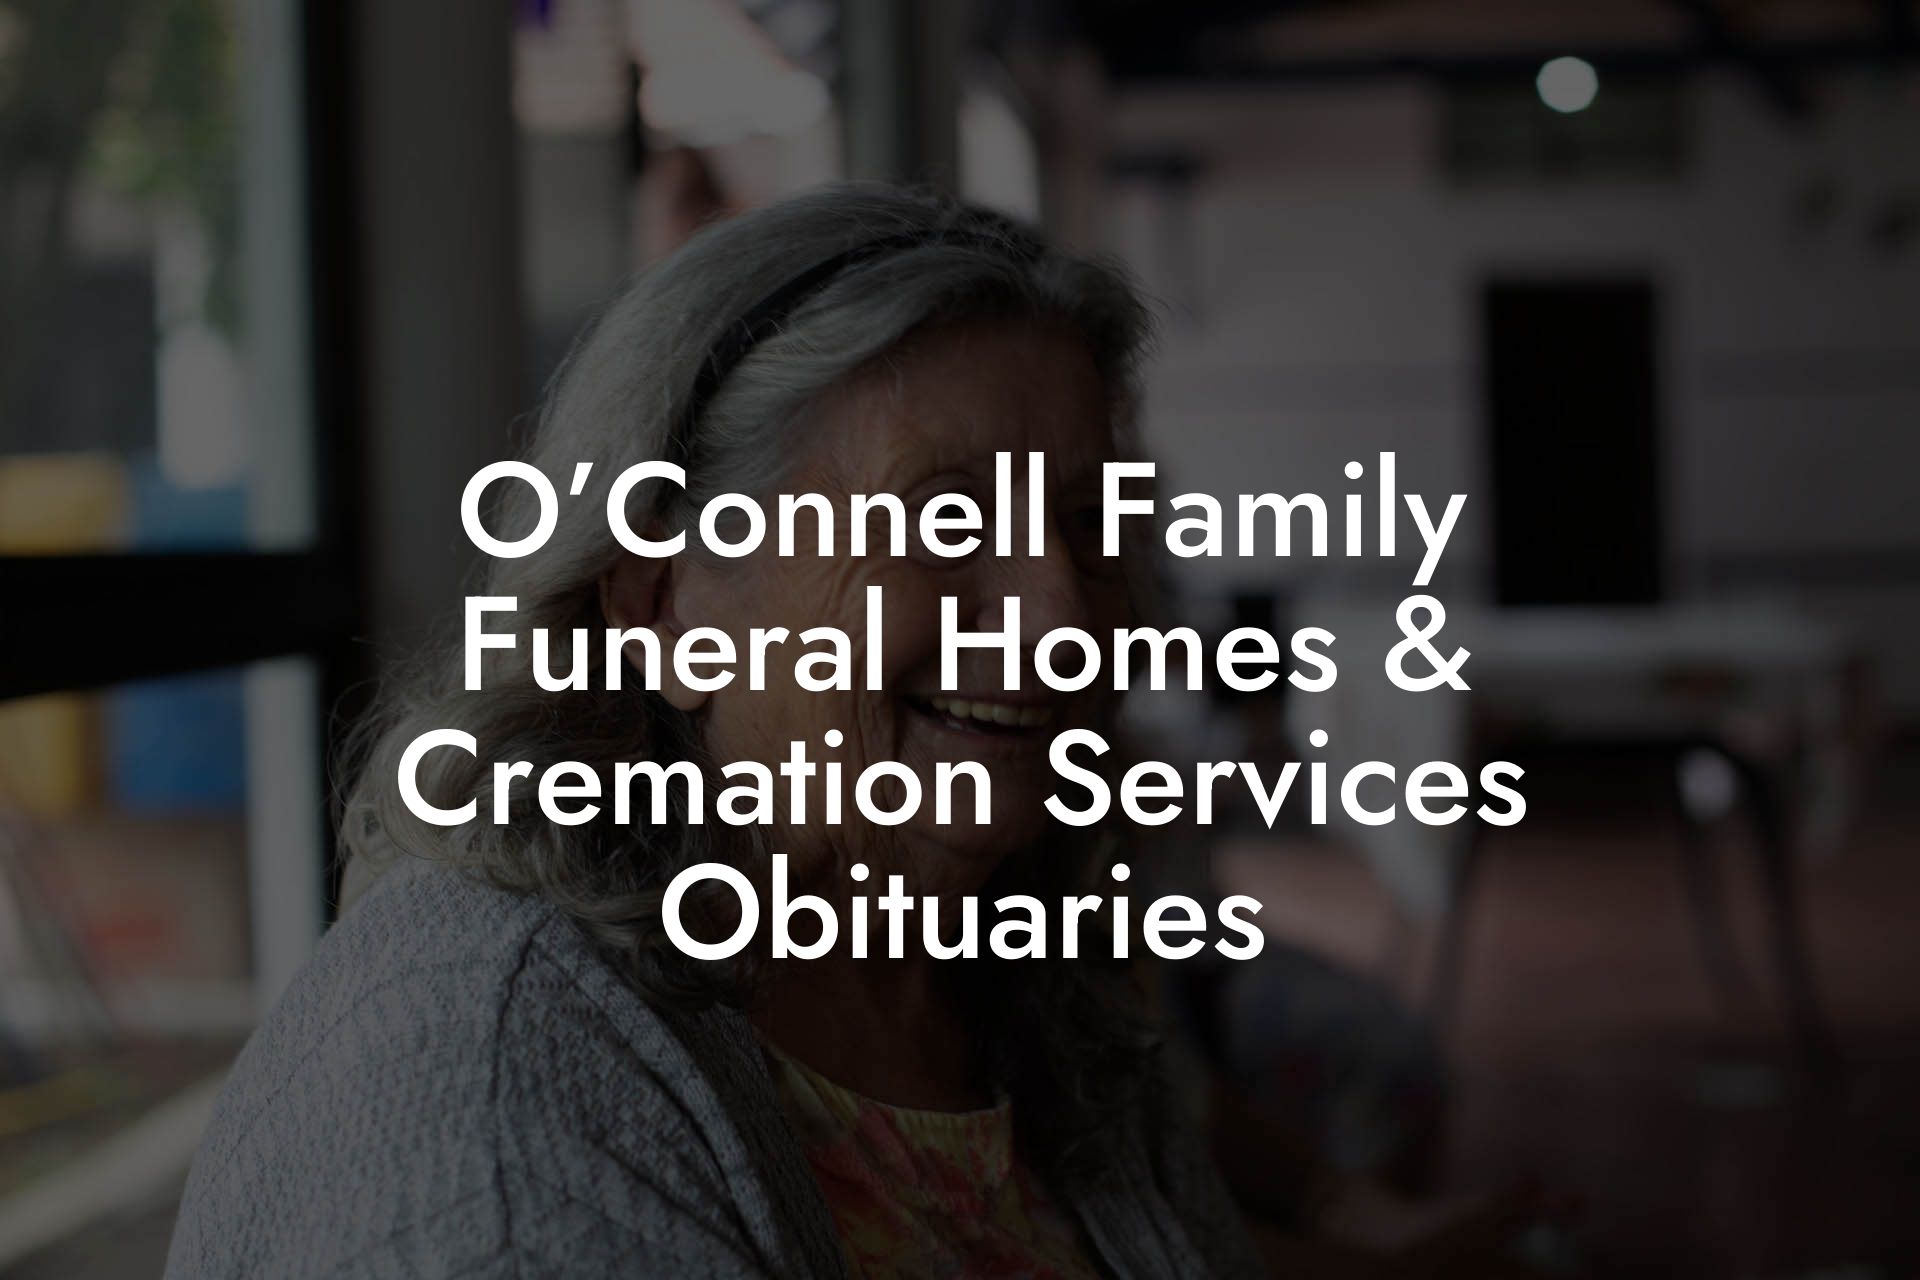 O’Connell Family Funeral Homes & Cremation Services Obituaries - Eulogy ...